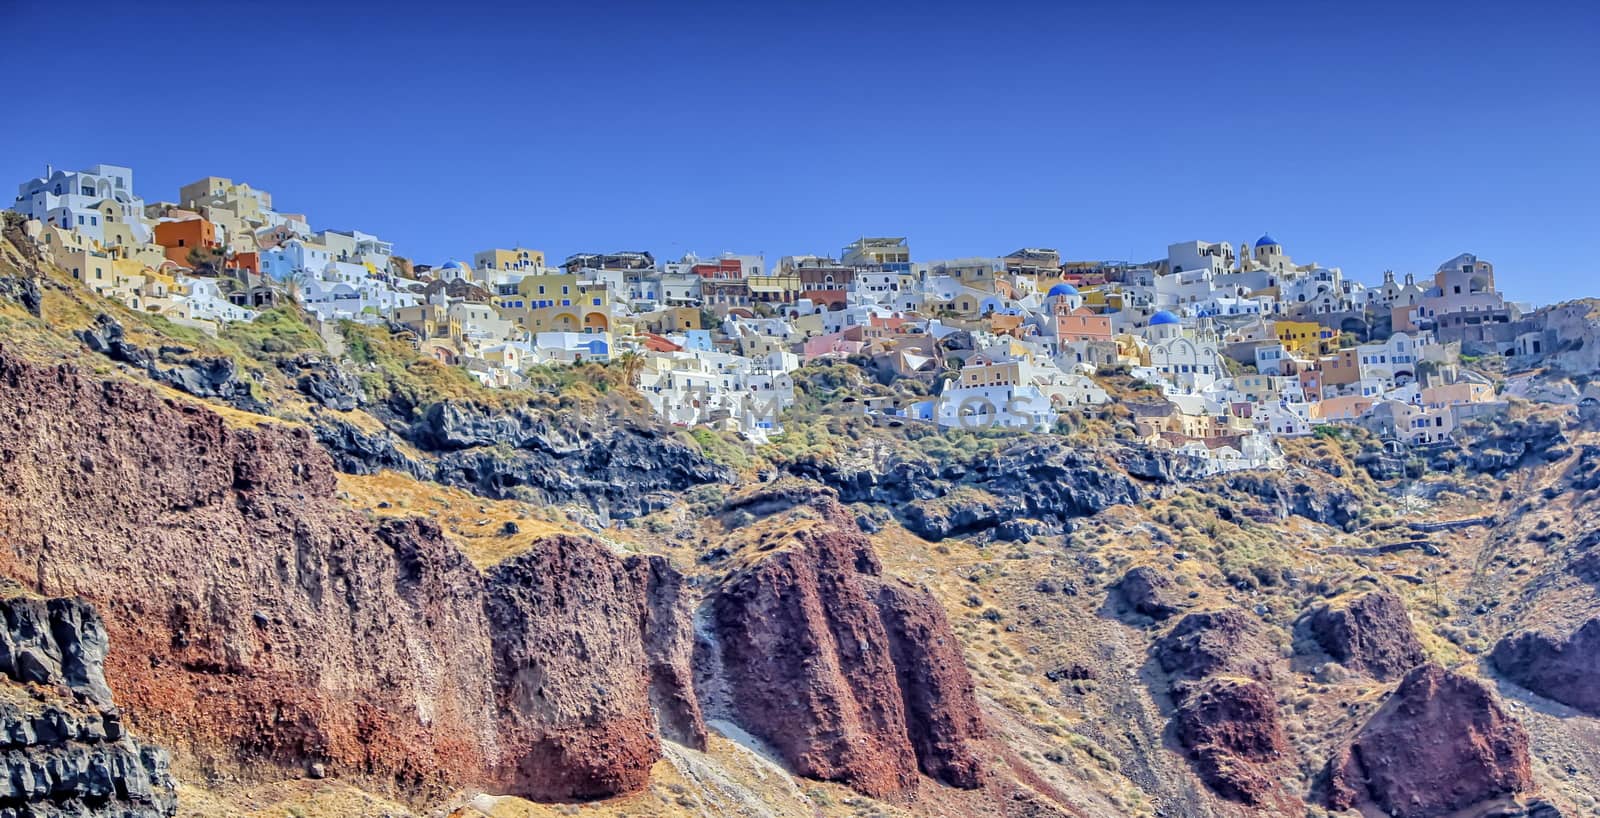 View of colorful Oia village on Santorini island by beautiful day, Greece